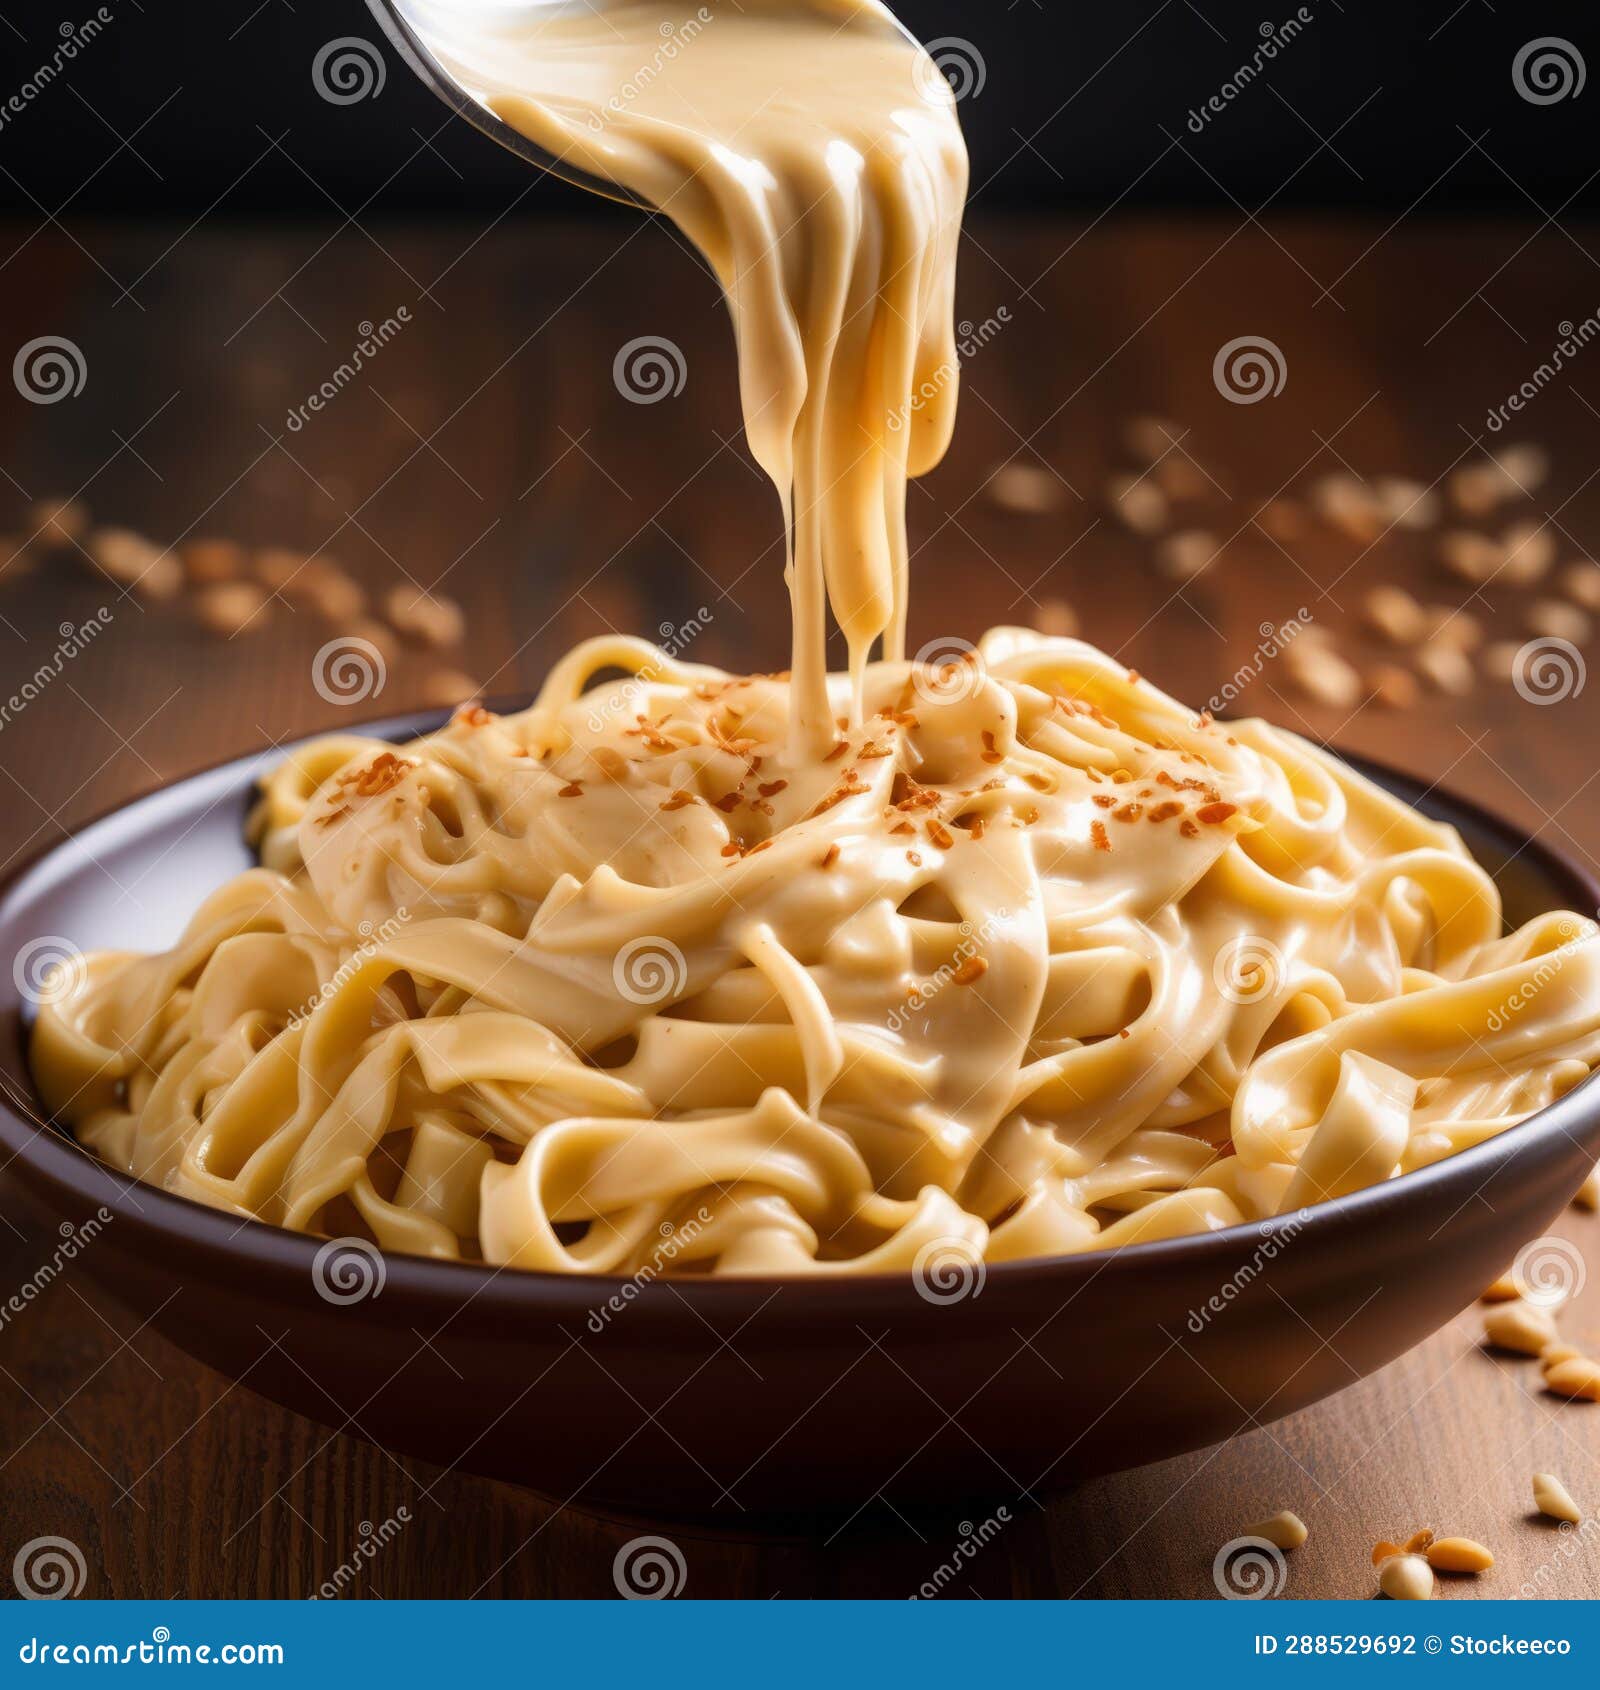 creamy and crunchy pasta with peanut butter sauce